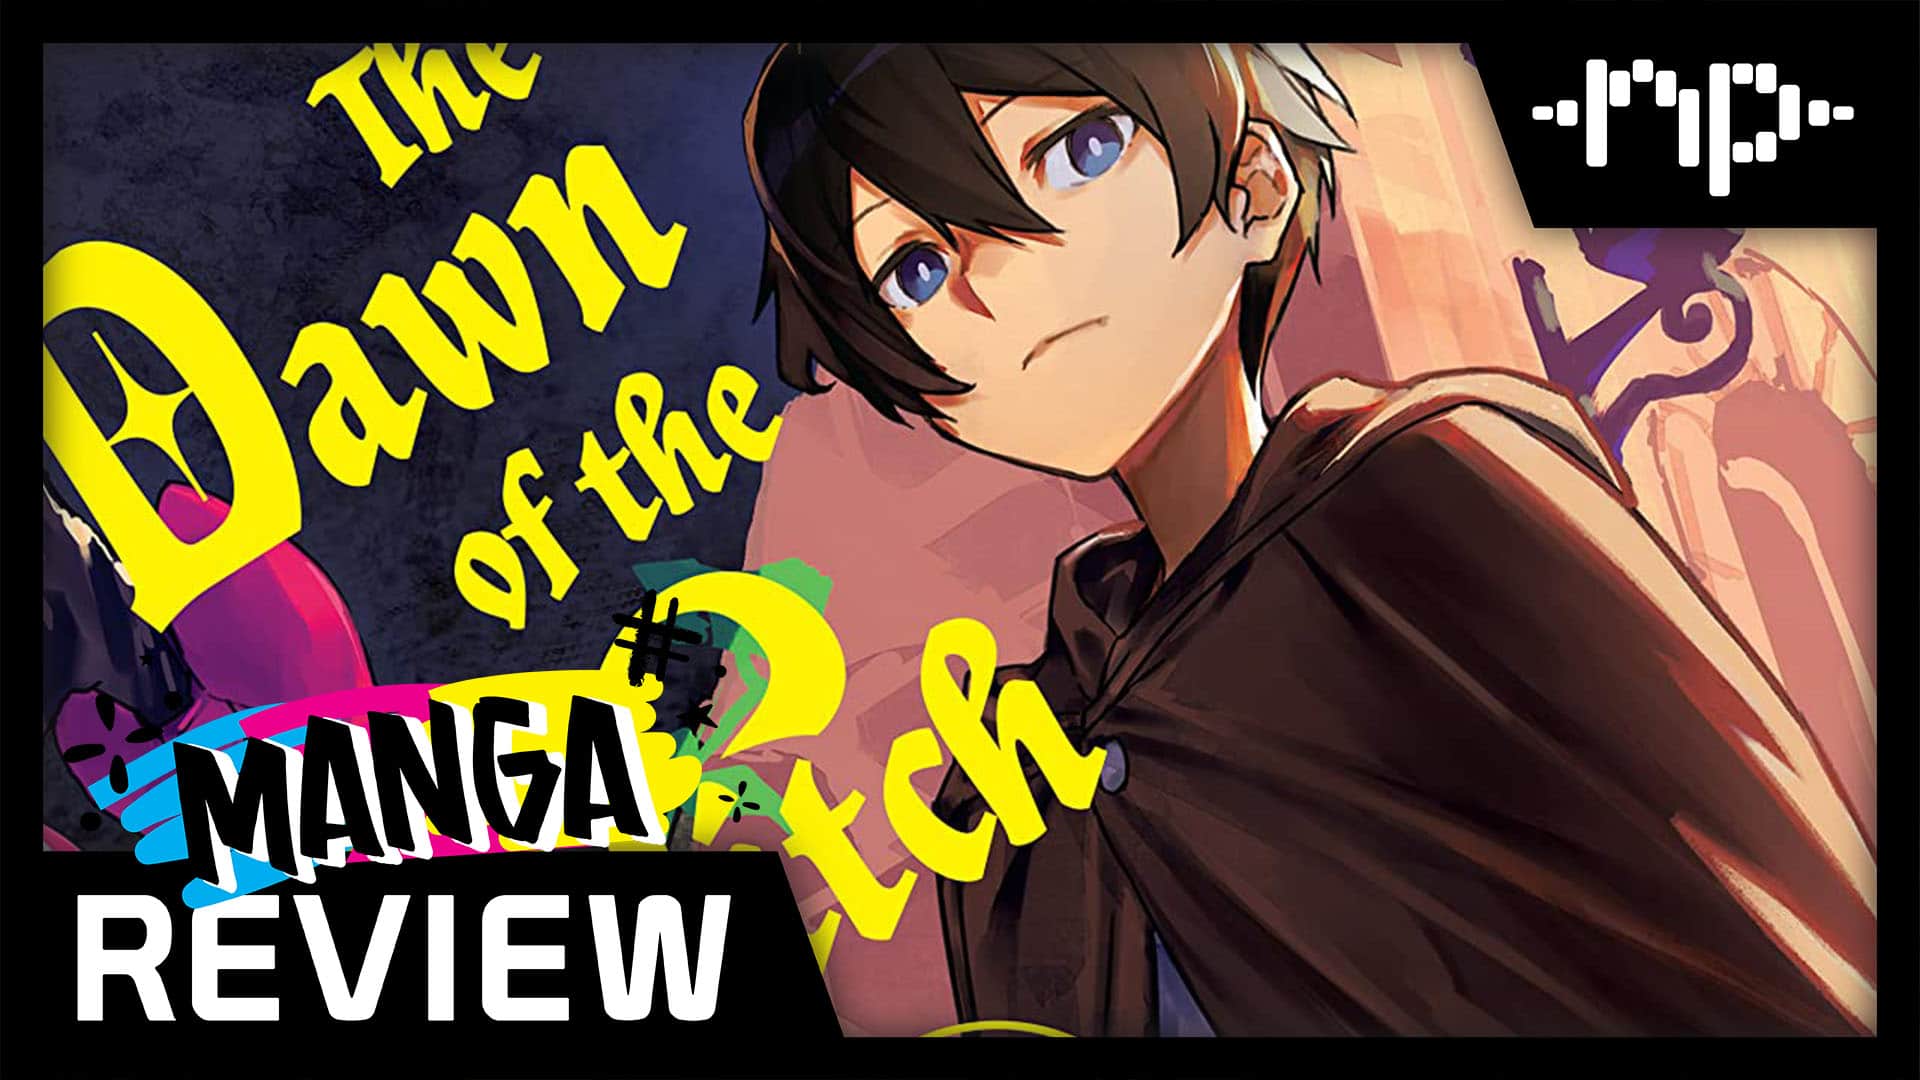 The Dawn of the Witch Vol. 1 Manga Review – A Charismatic RPG-Esque Party